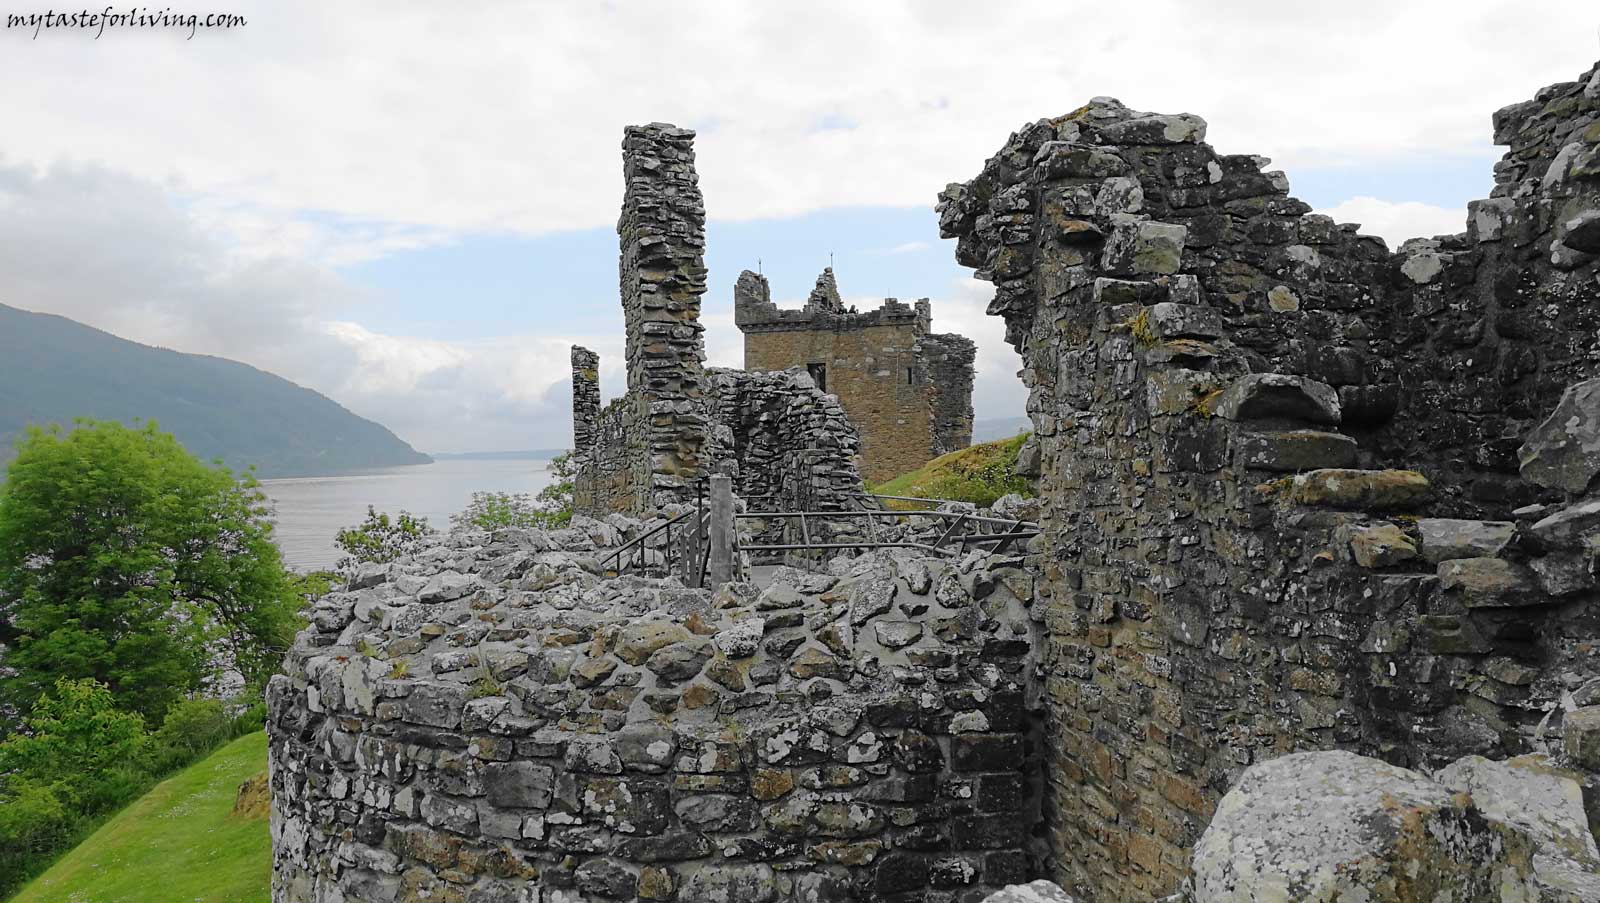 Urquhart is one of Scotland's largest castles. Its ruins are located on the shores of the famous and creepy Loch Ness lake.